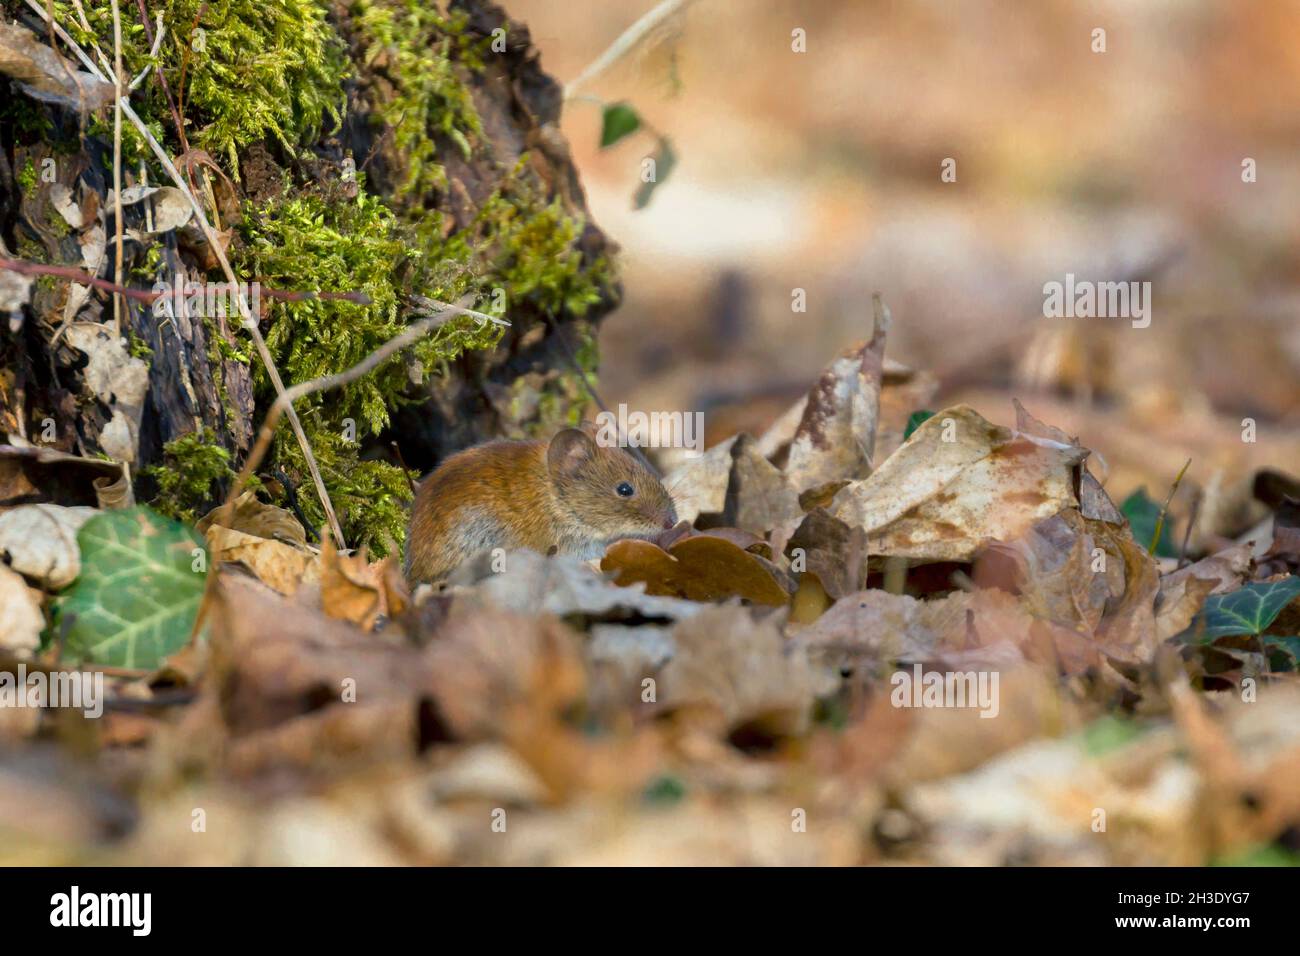 bank vole (Clethrionomys glareolus, Myodes glareolus), sitting on the forest floor between leaves , Germany Stock Photo